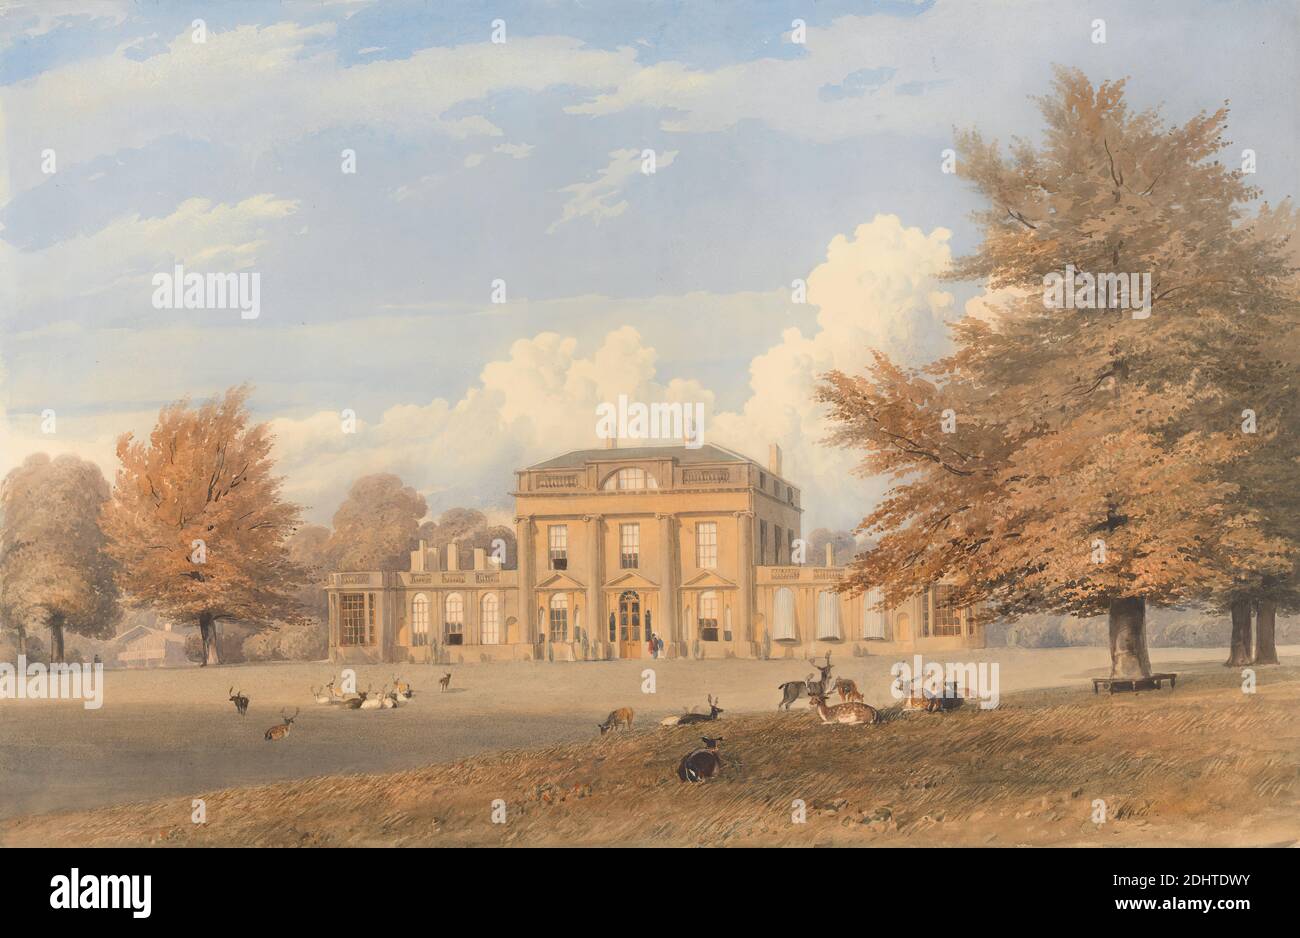 Roundway Park, Wiltshire: Exterior View, unknown artist, nineteenth century, ca. 1840, Graphite and watercolor on moderately thick, slightly textured, white wove paper, Sheet: 18 9/16 x 28 1/2 inches (47.1 x 72.4 cm), animals, architectural subject, architecture, building, clouds, deer, front elevations, grass, house, landscape, lawn, men, park (grounds), people, women, Devizes, England, Europe, United Kingdom, Wiltshire Stock Photo